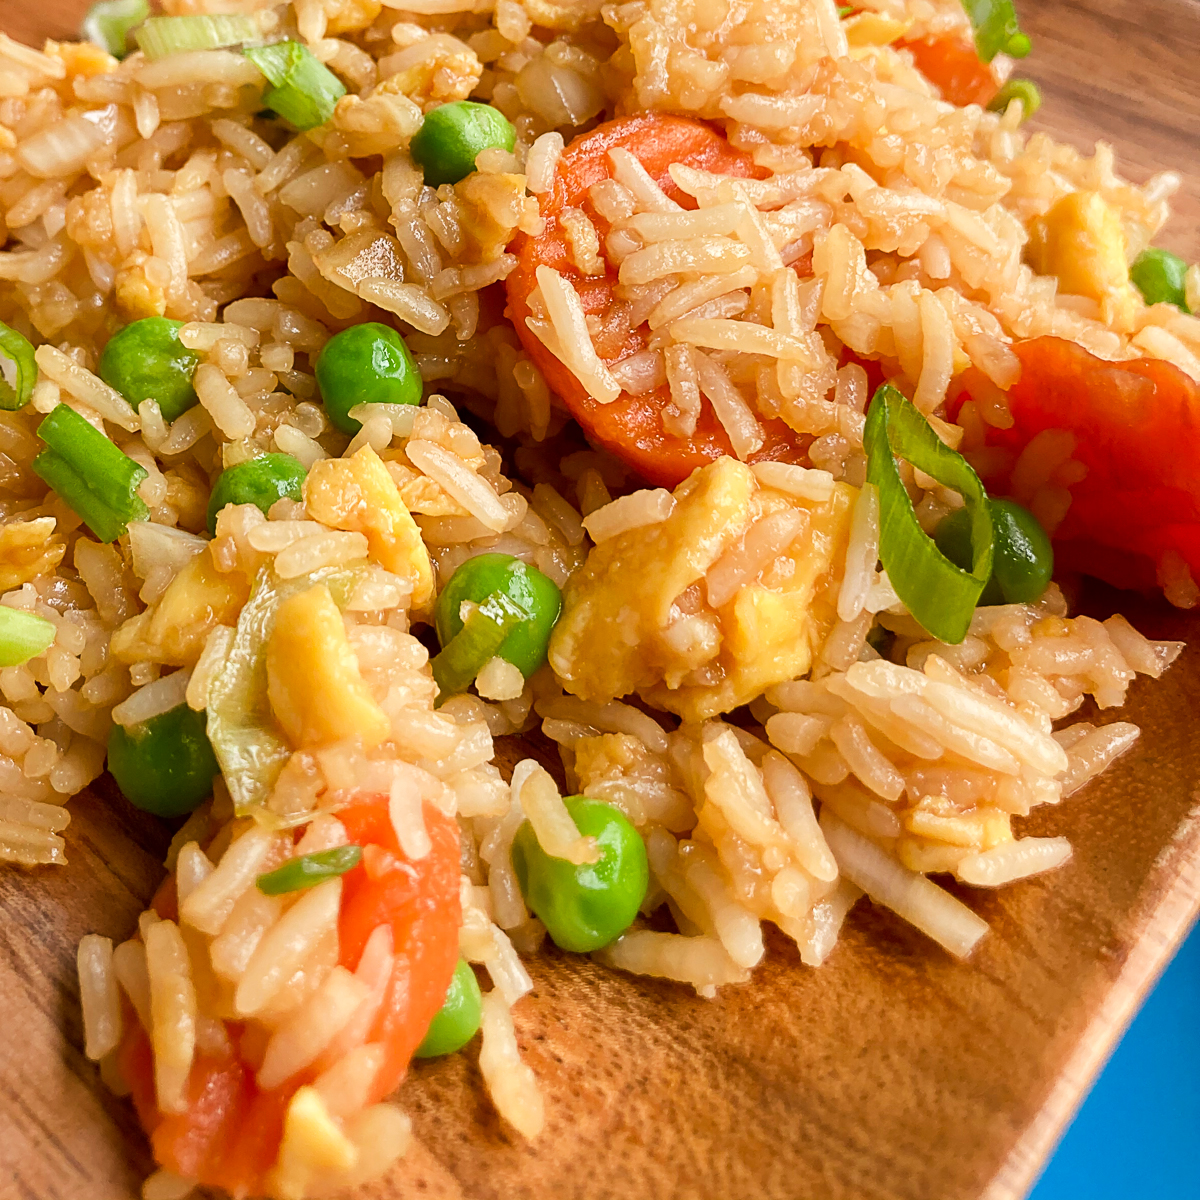 Fried rice recipe on a brown plate